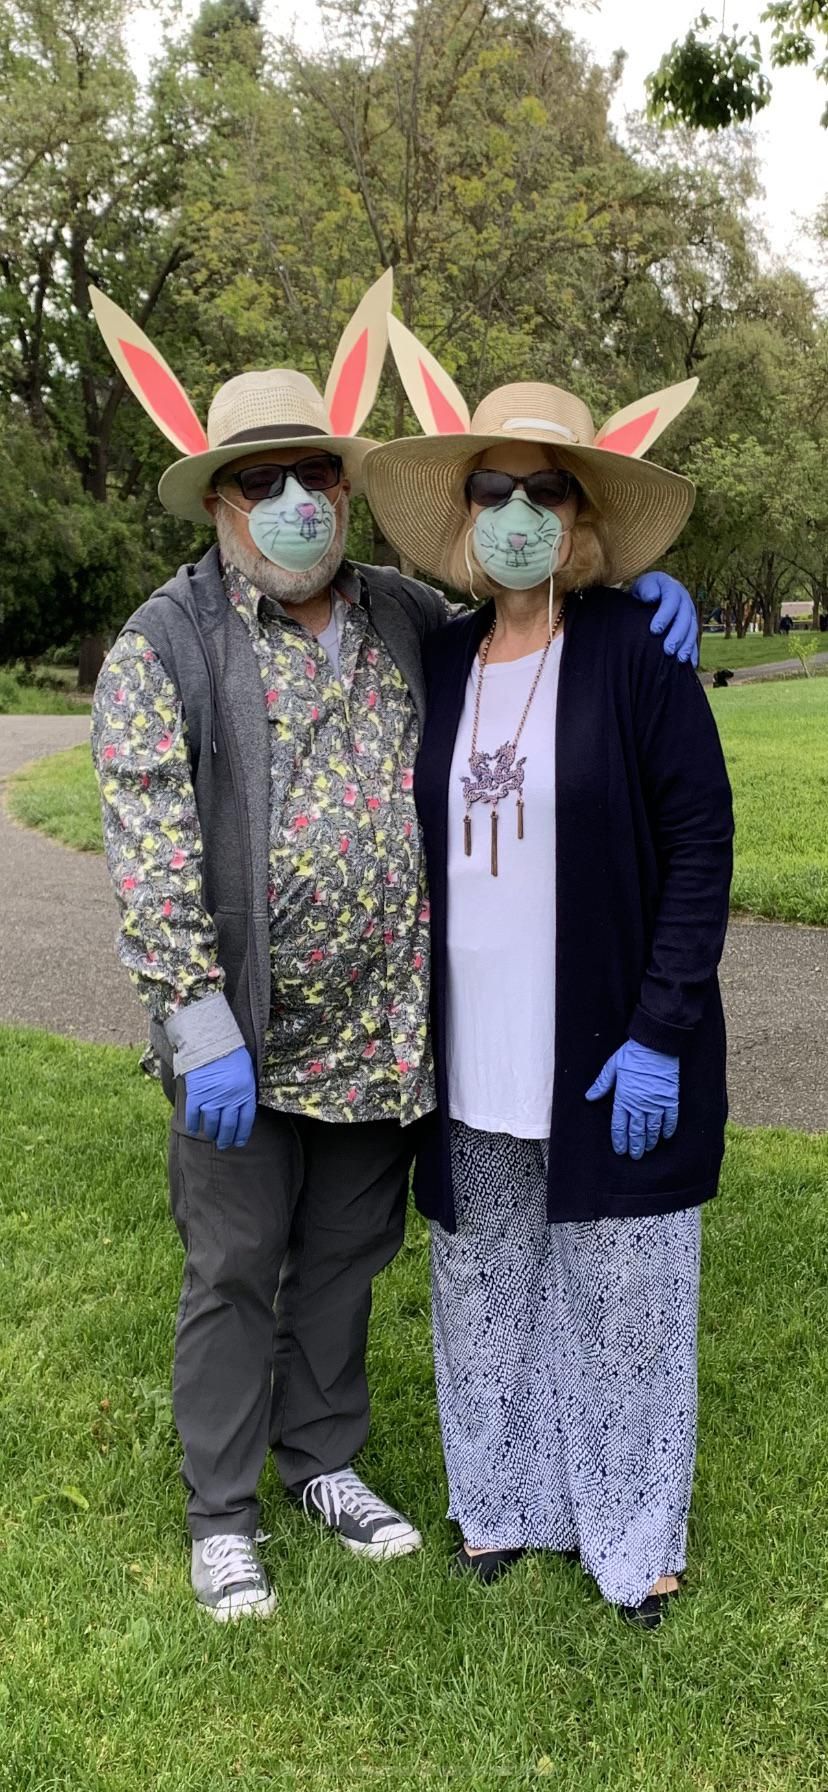 My parents really wanted to watch my son hunt for eggs today. I told them they had to wear gloves & masks just to be safe. They showed up wearing this!